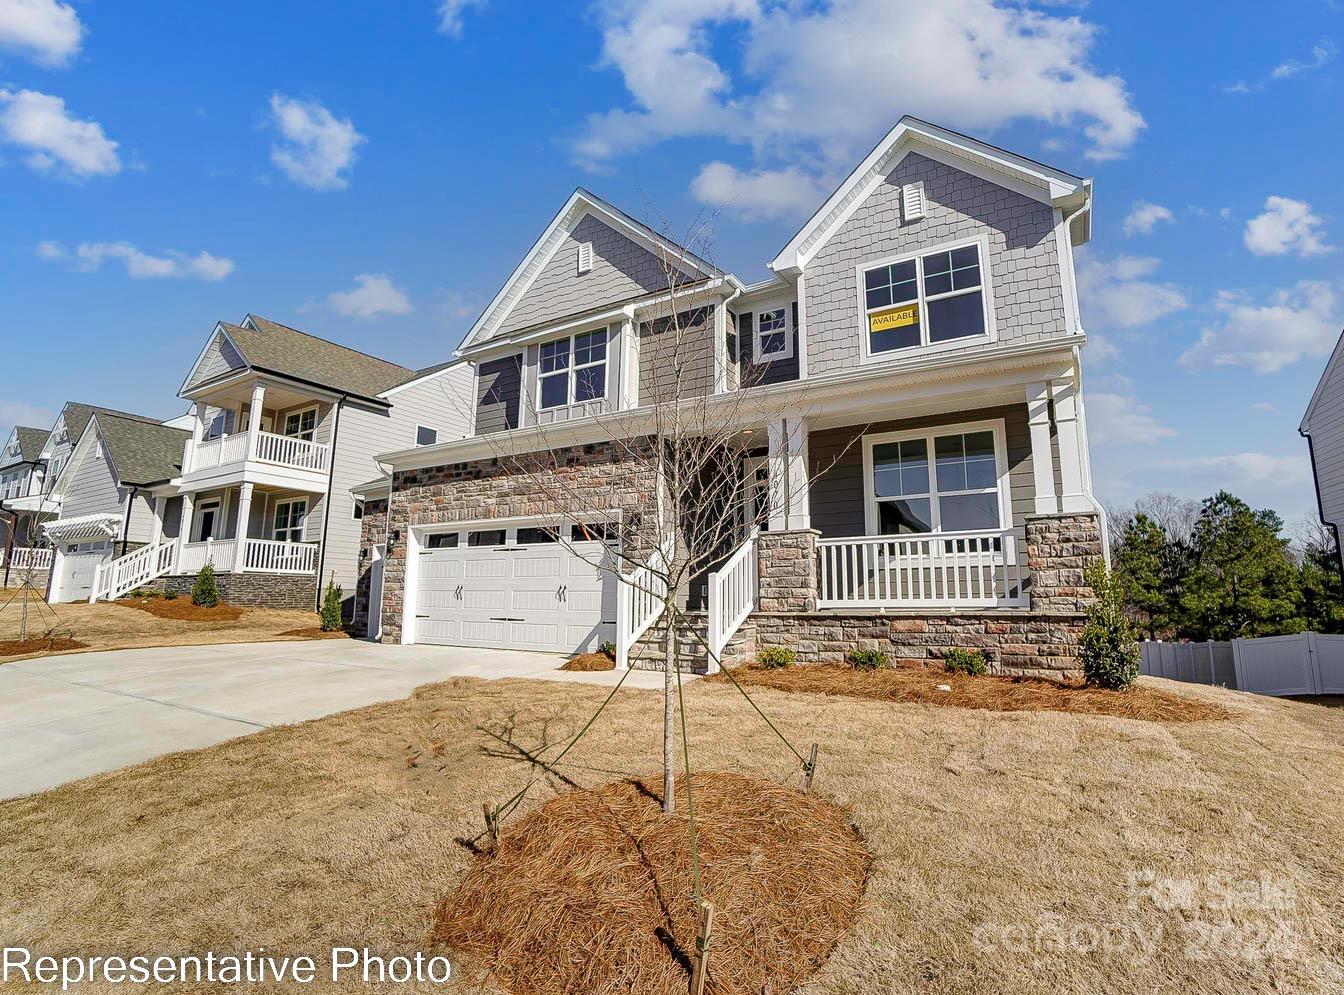 Photo one of 2168 Windley Dr # 2-02 Gastonia NC 28054 | MLS 4067339